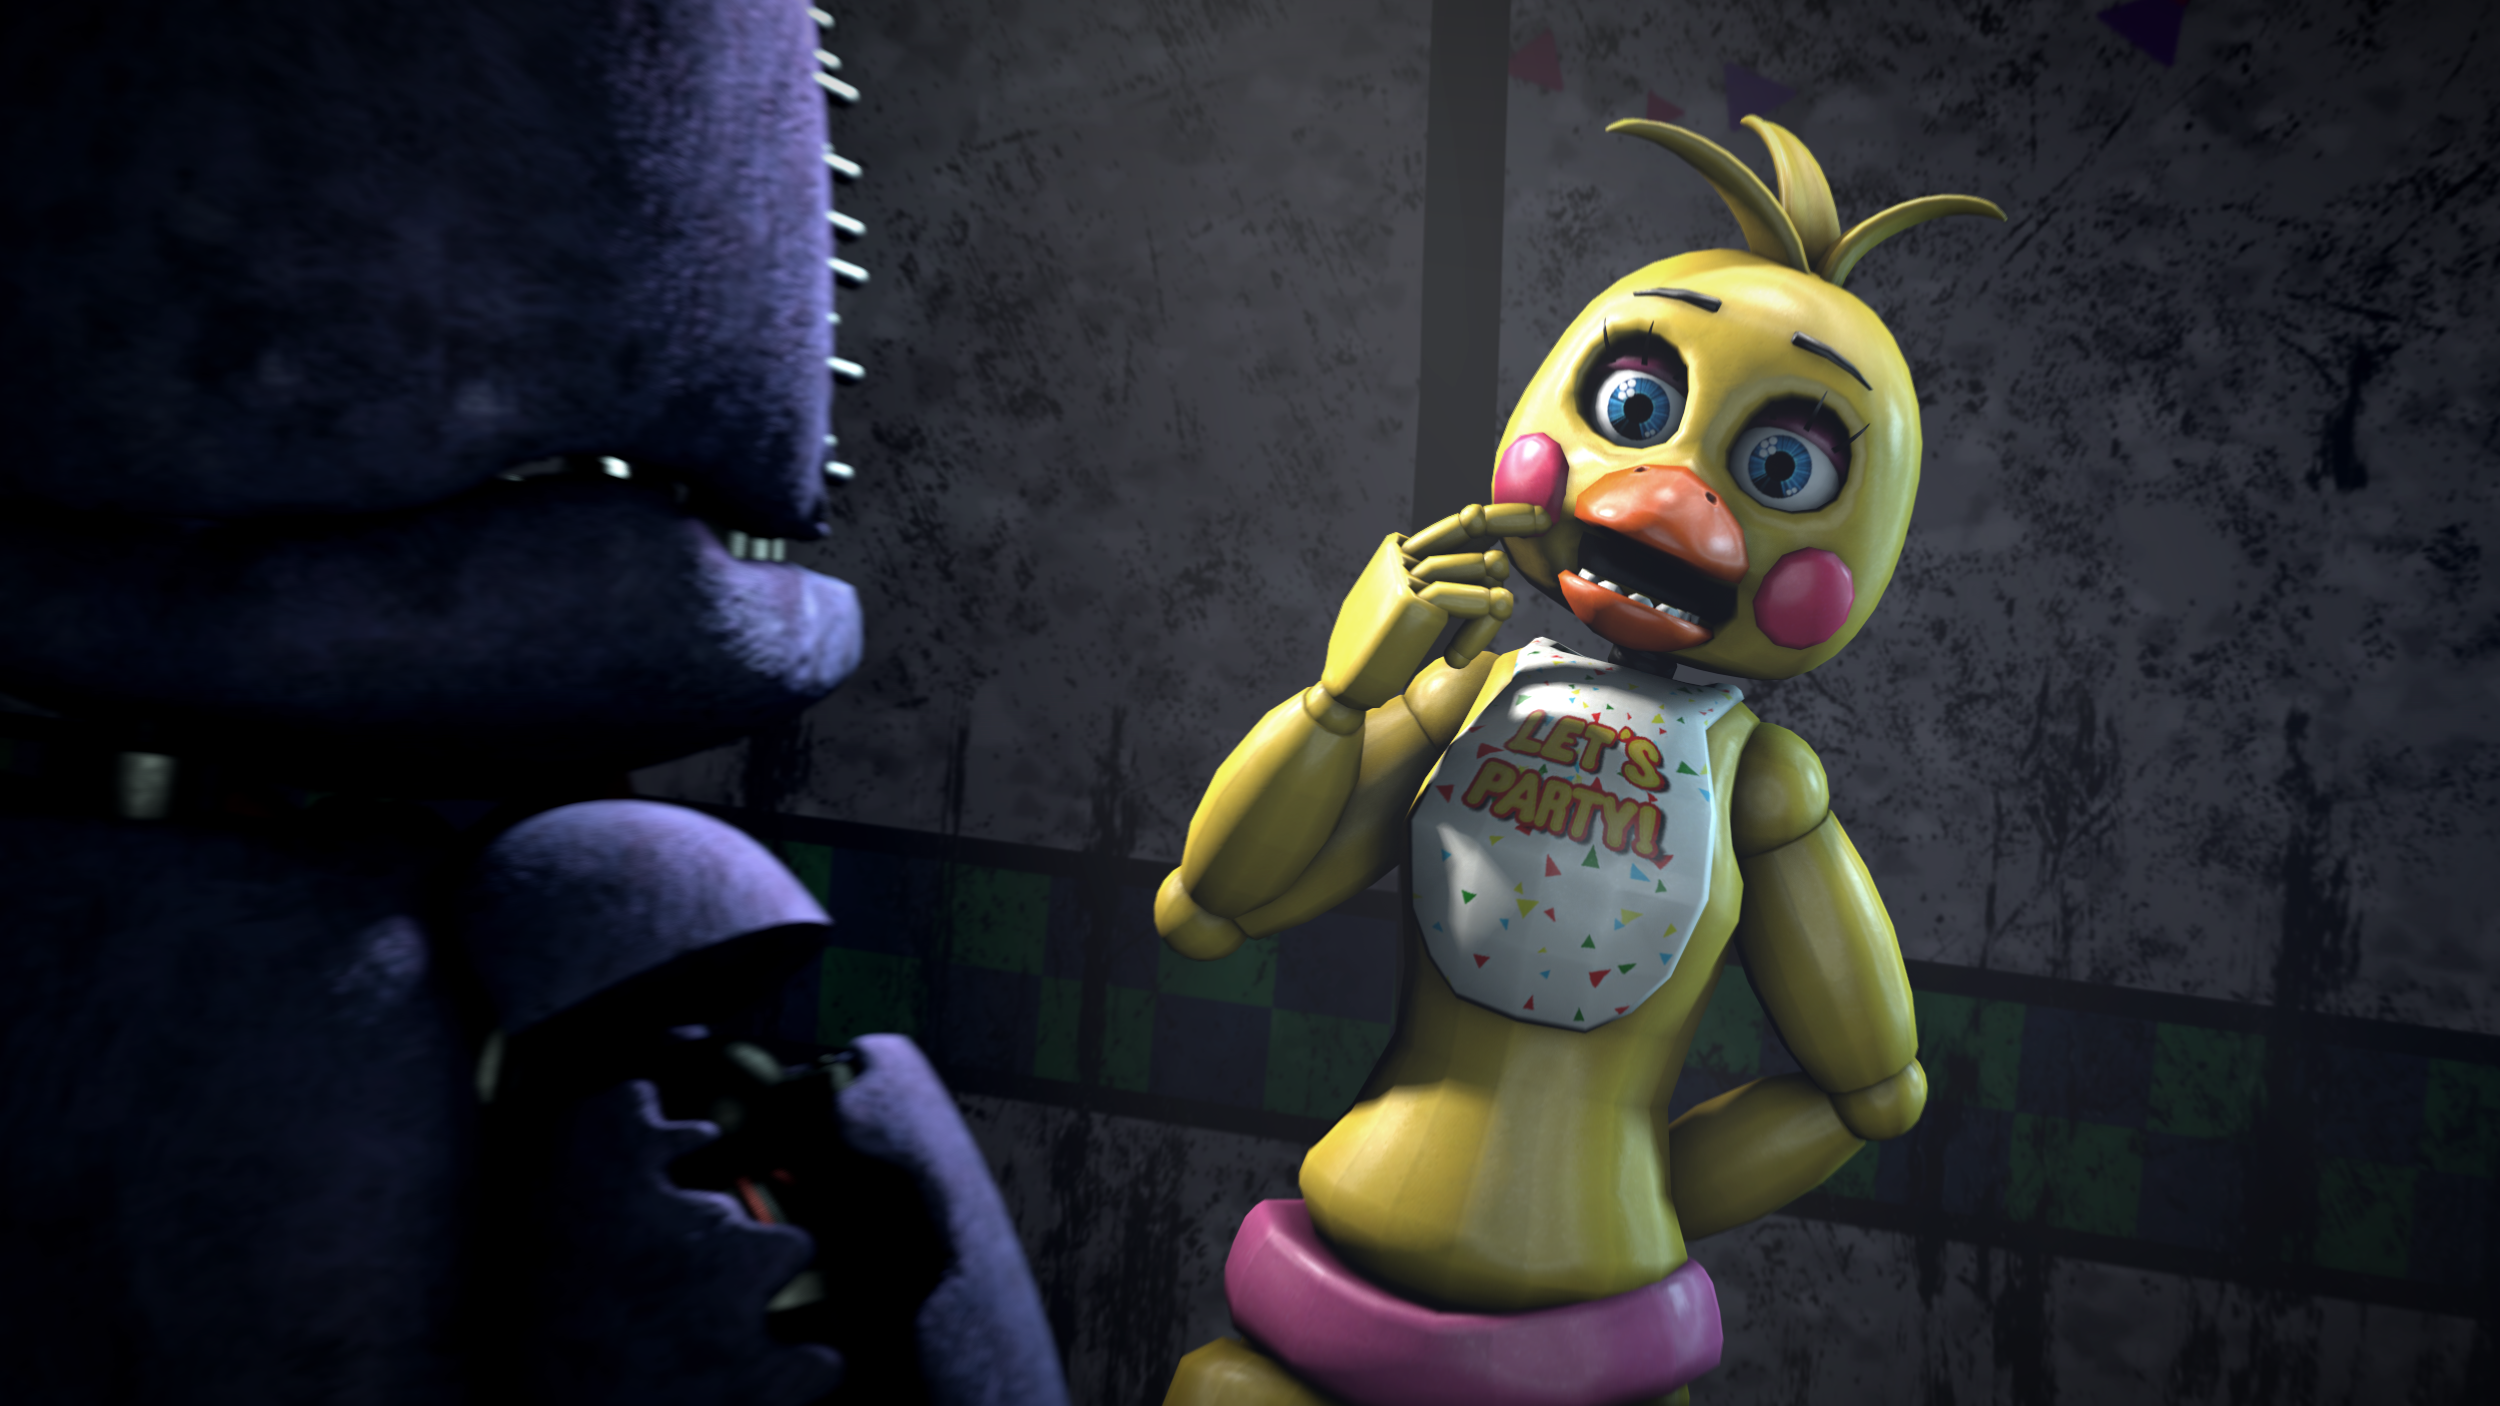 SFM FNAF Remake] Withered Chica Icon by Fazbearmations on DeviantArt